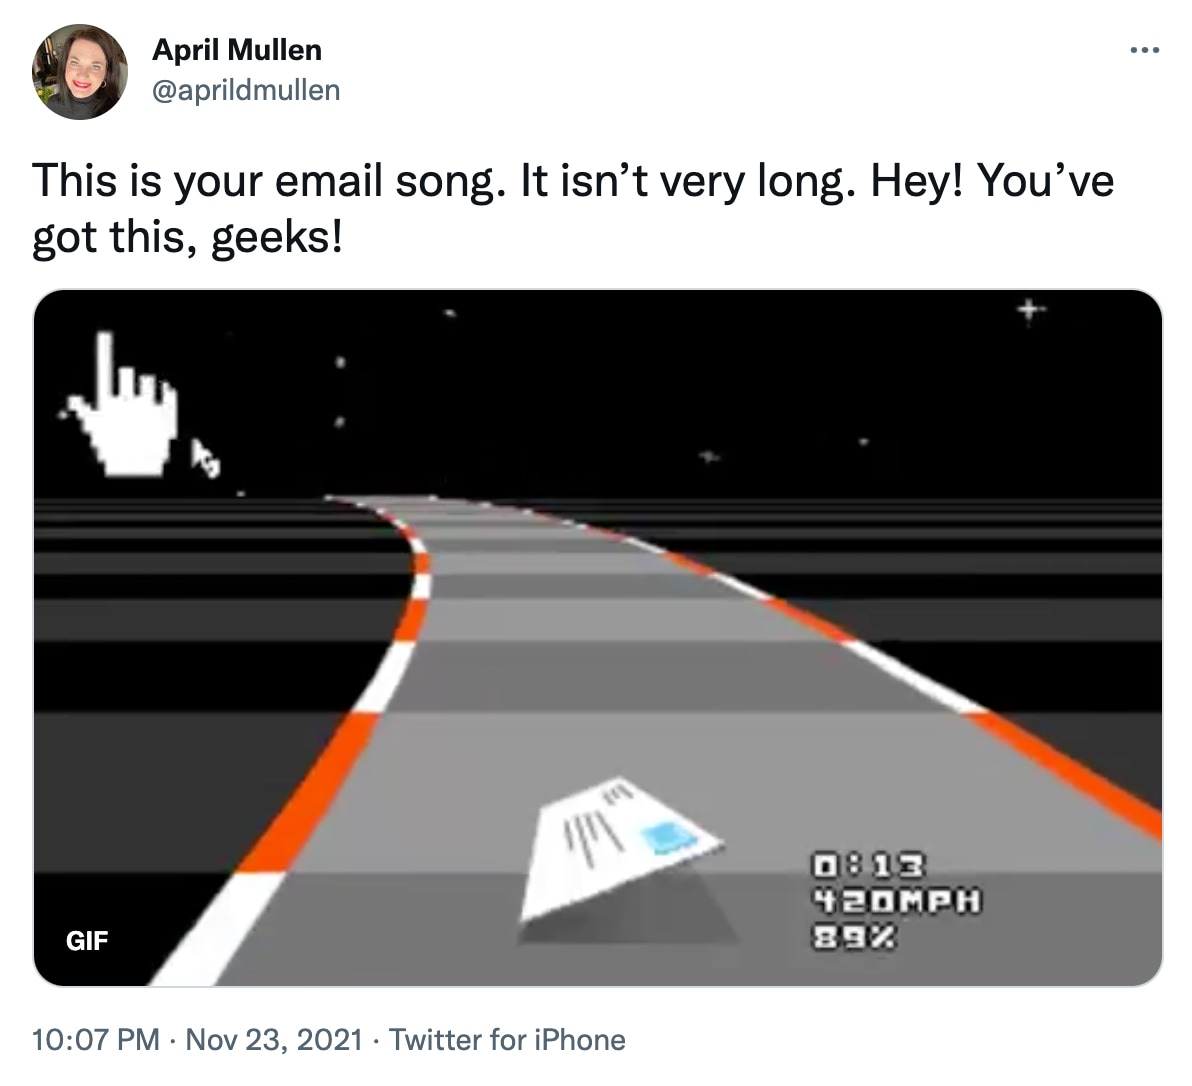 @aprildmullen on Twitter: This is your email song. It isn't very long. Hey! You've got this geeks!